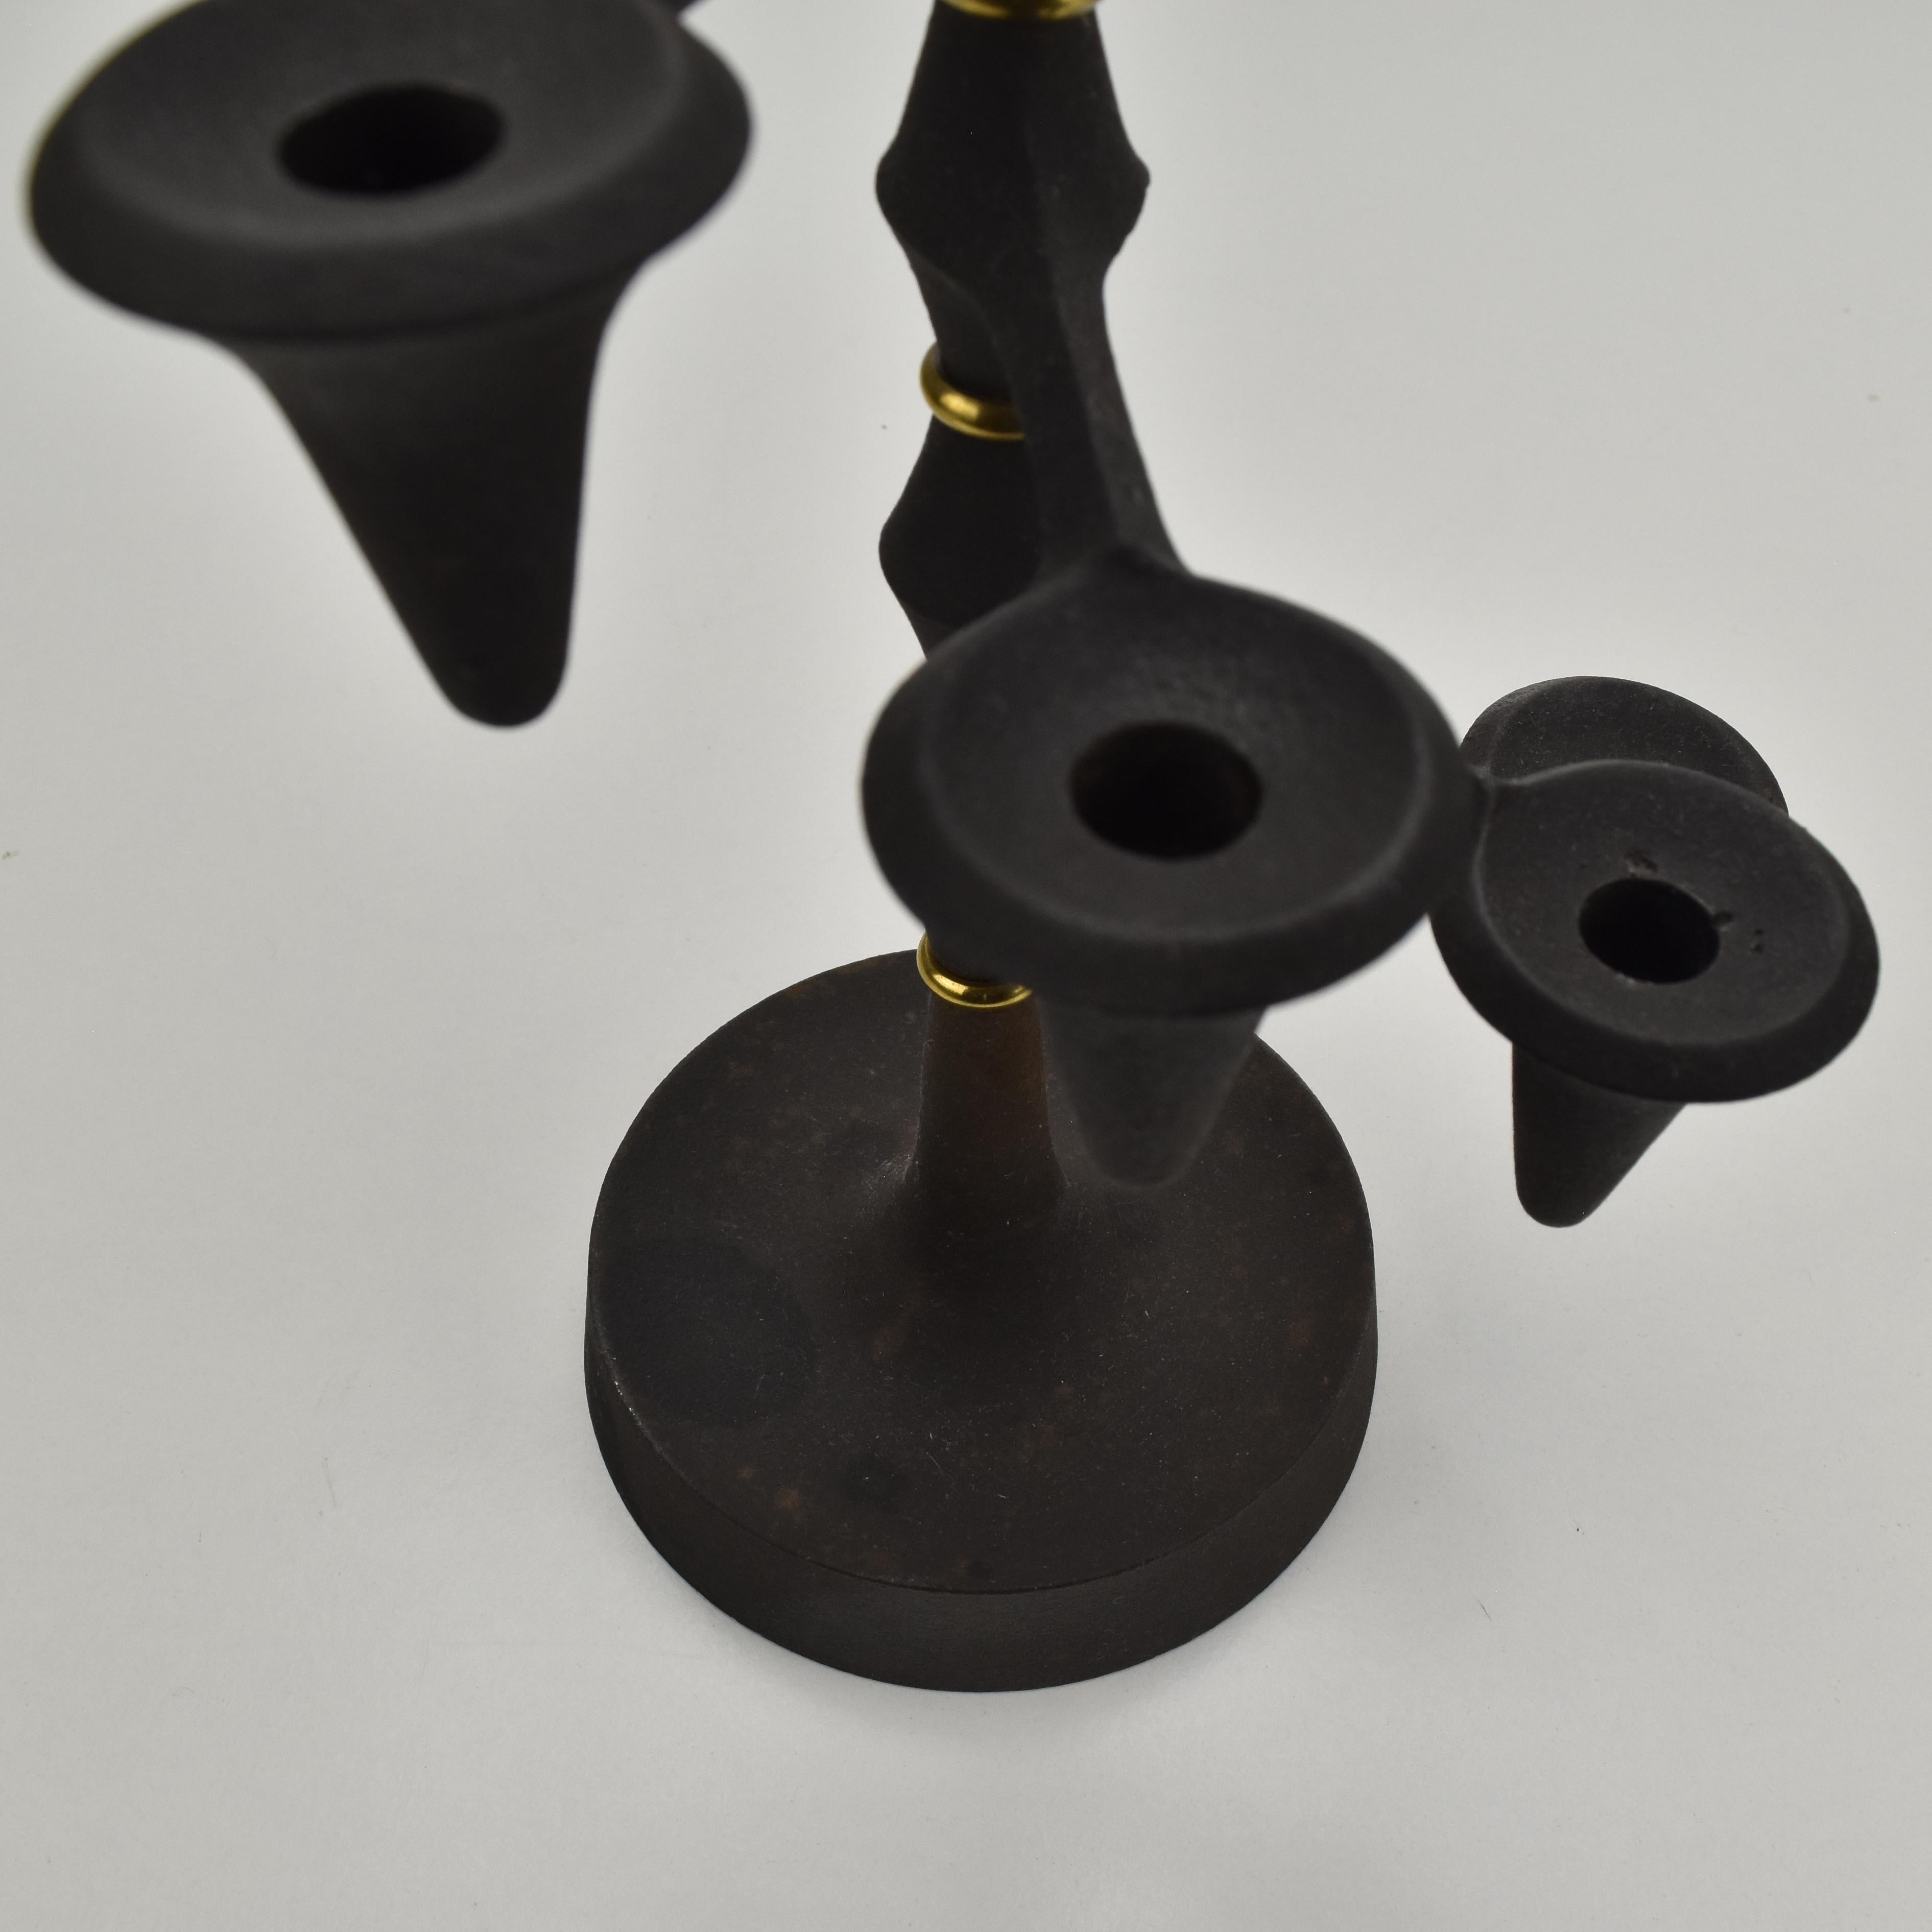 Mid-20th Century Sculptural Candelabra Candle Holder by Jens Quistgaard for Dansk JHQ Cast Iron For Sale